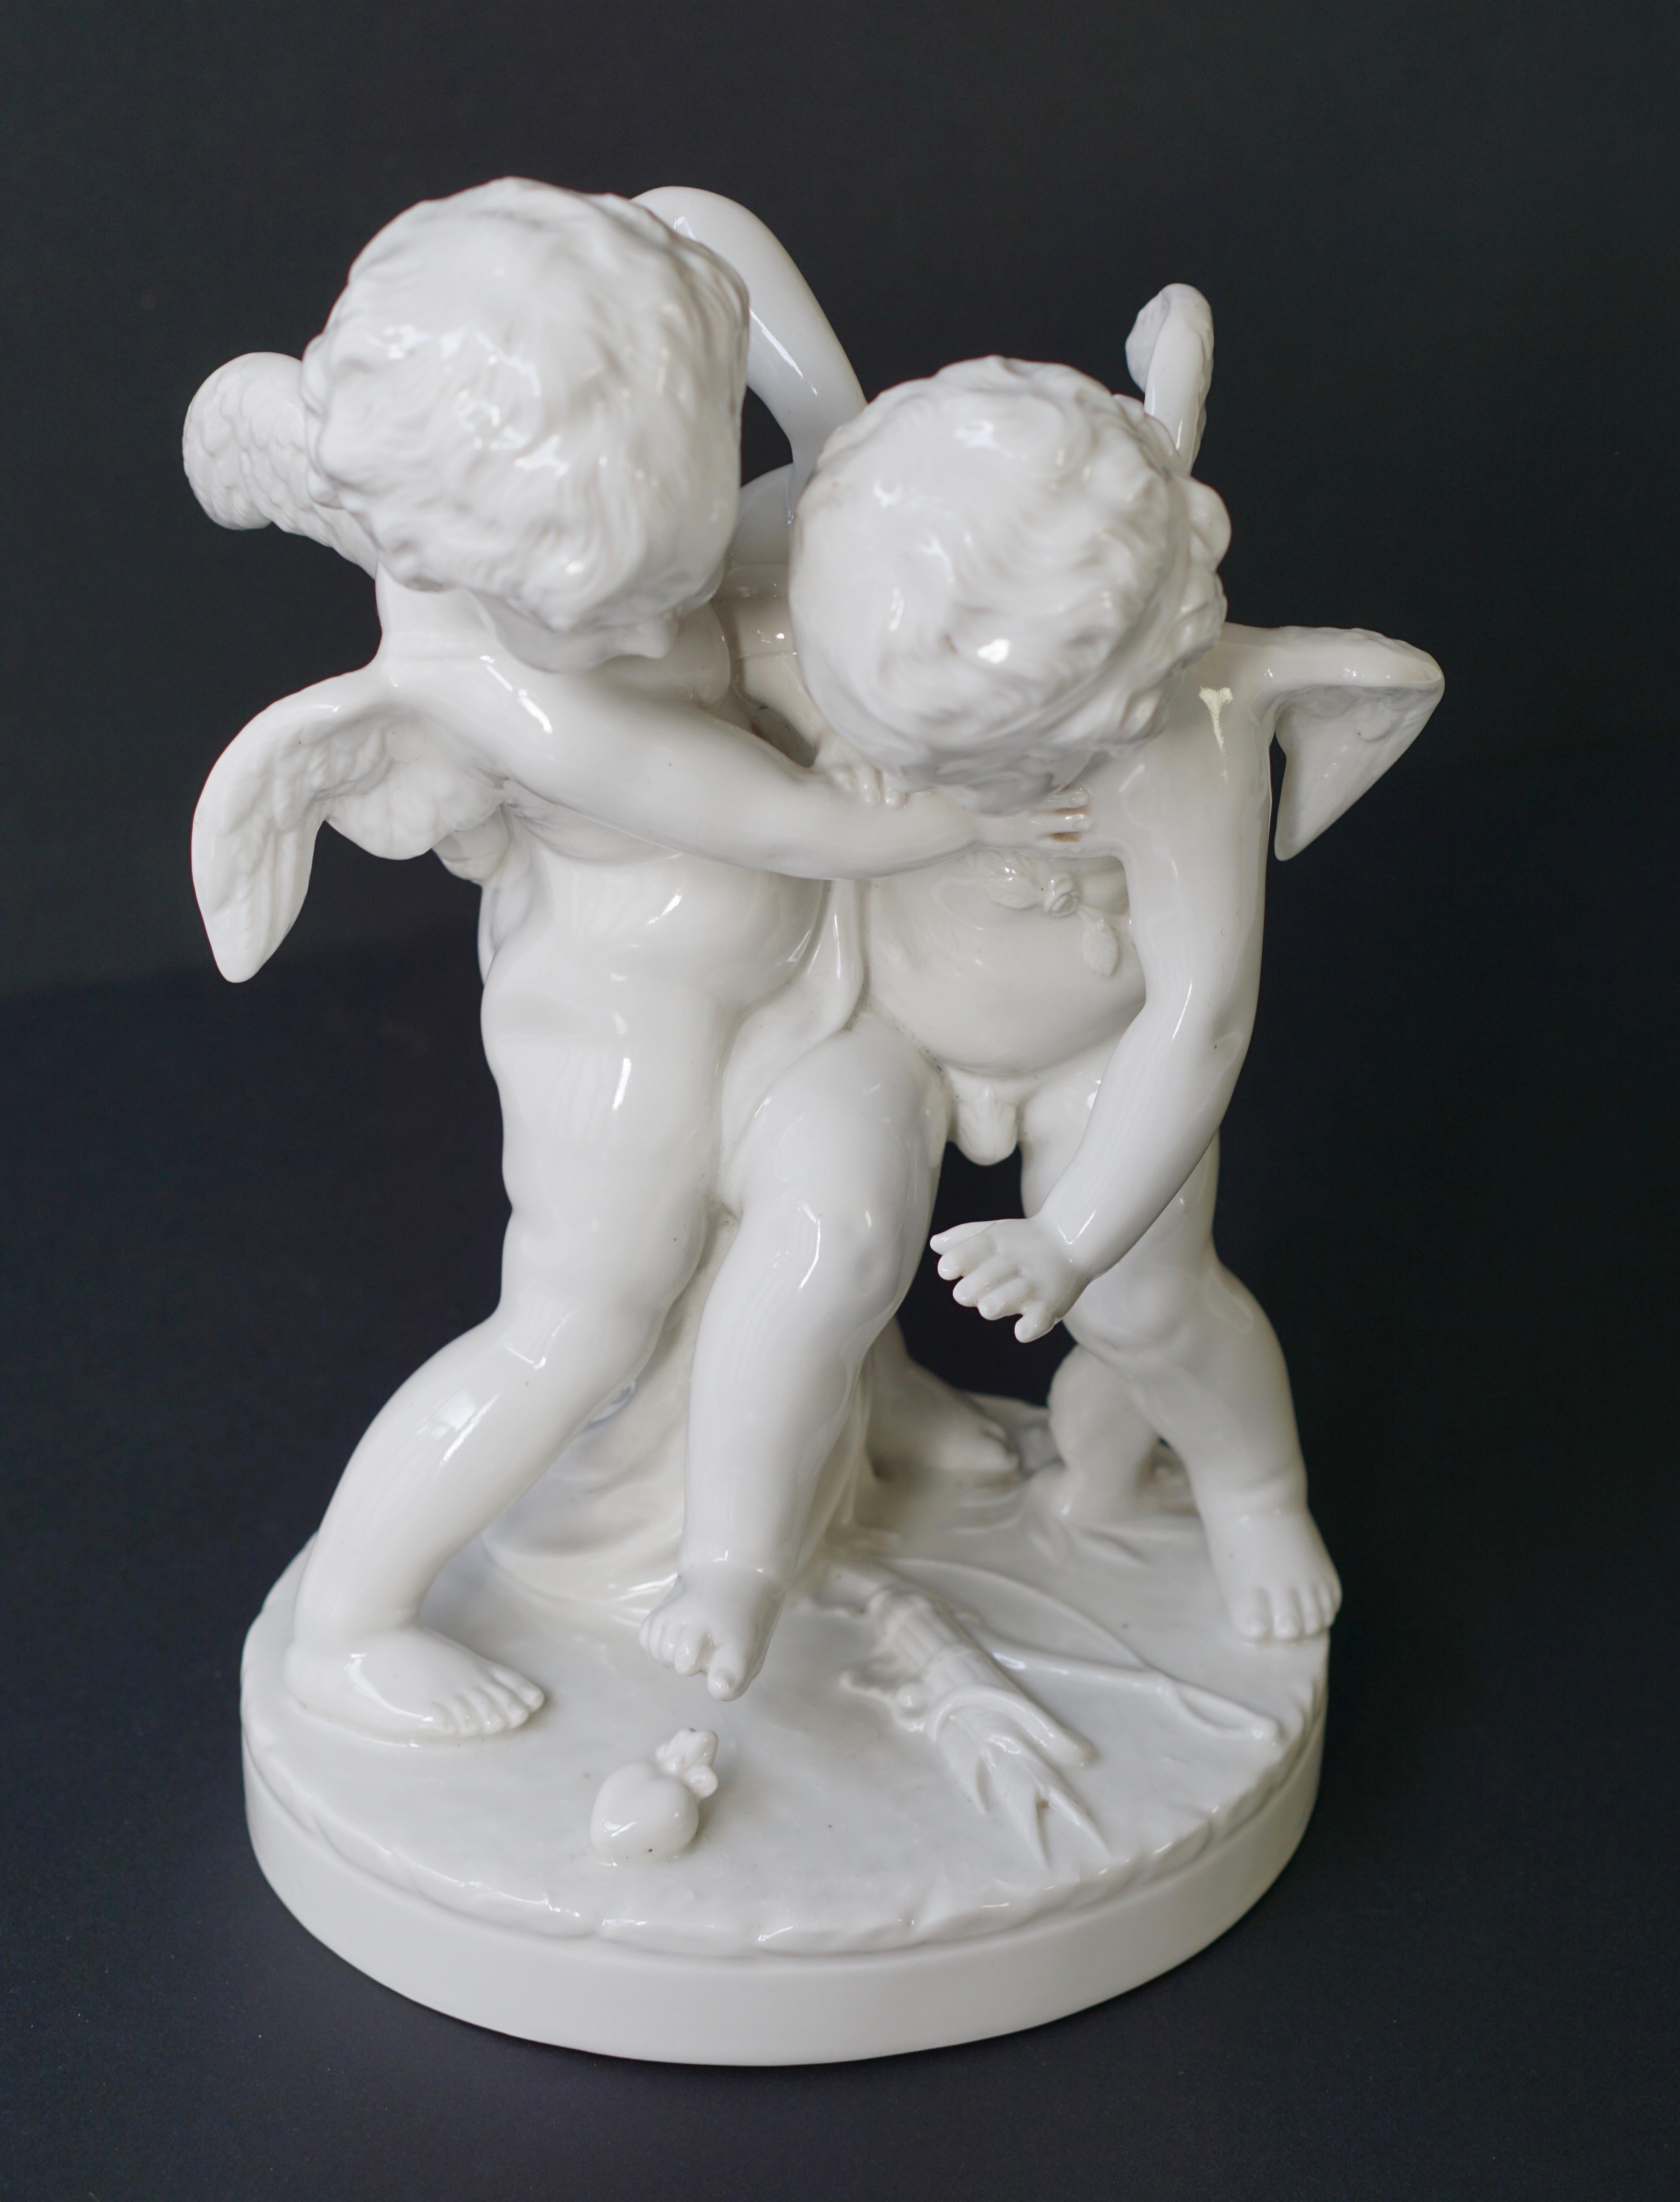  Porcelain Figurative Sculpture Representing Two Little Angels, Putti For Sale 3